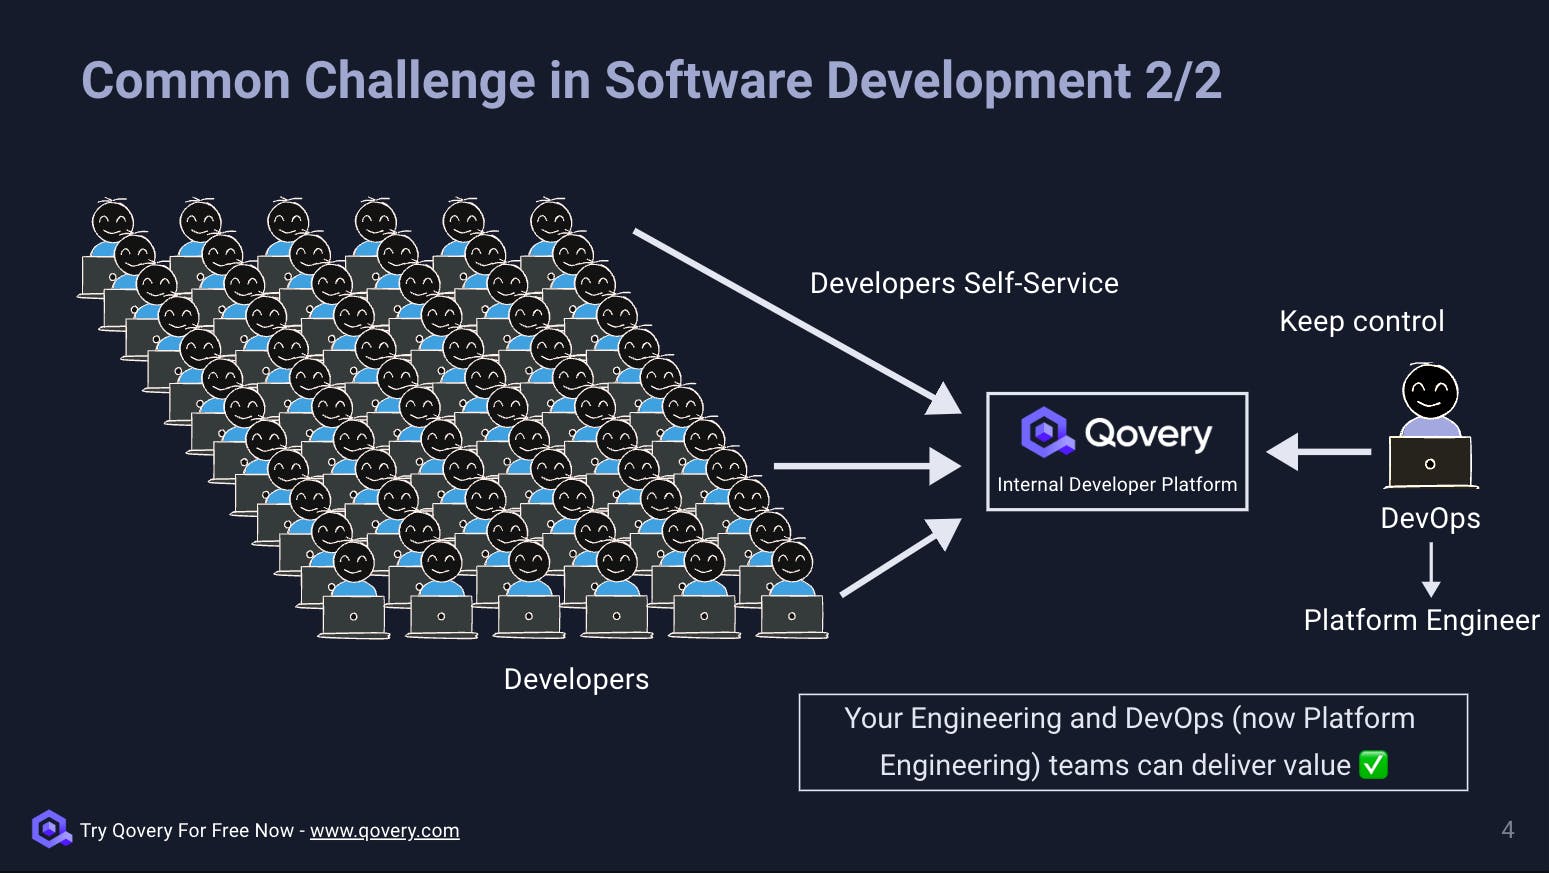 Internal Developer Platforms act as an intermediate layer between Platform Engineering teams and Developers to provide the self-service experience developers expect.